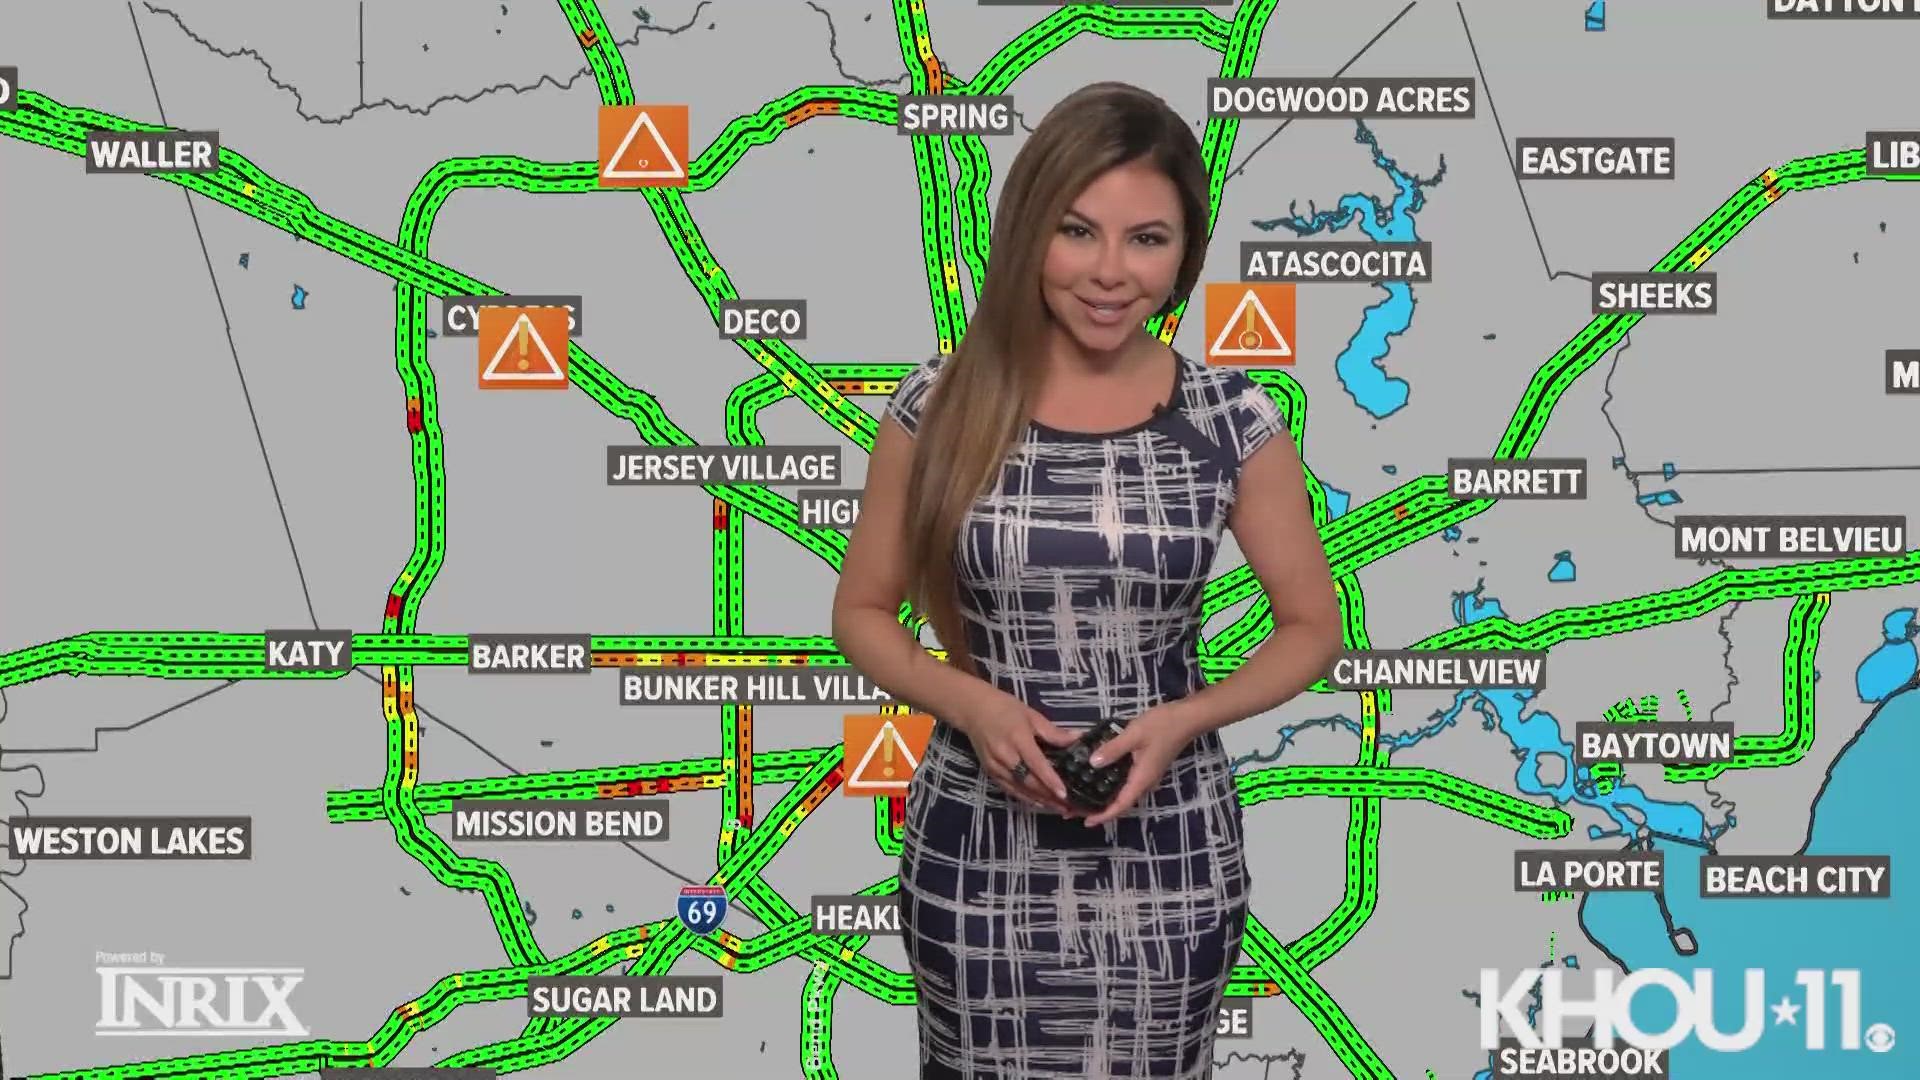 If you plan on being out and about this weekend in Houston, you'll want to plan around these major road closures and construction alerts.